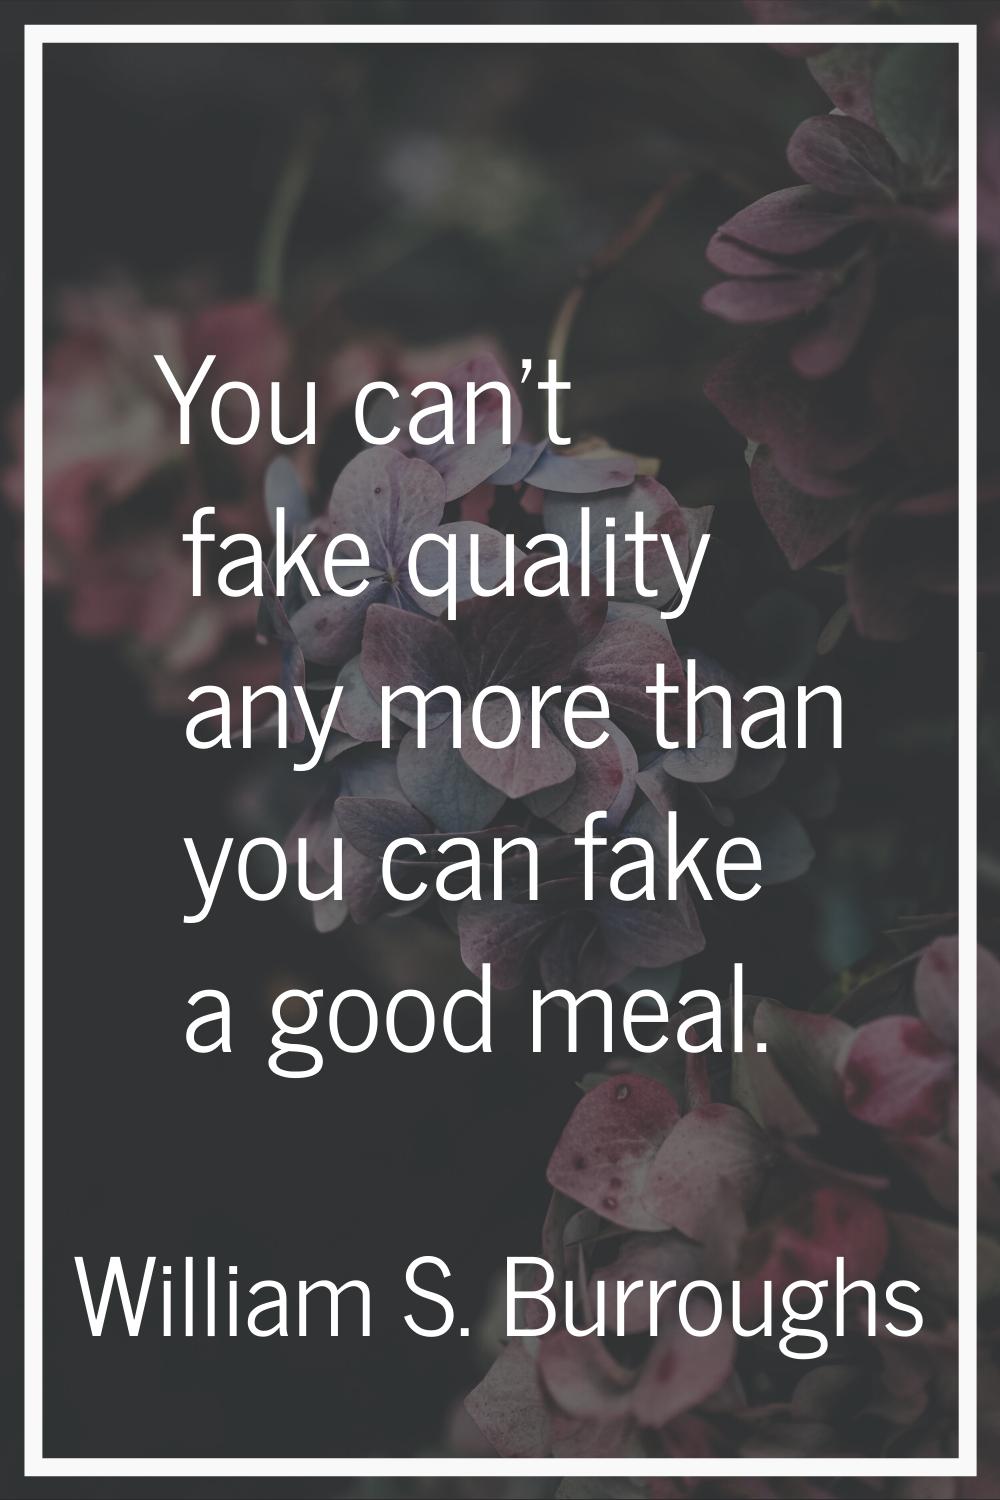 You can't fake quality any more than you can fake a good meal.